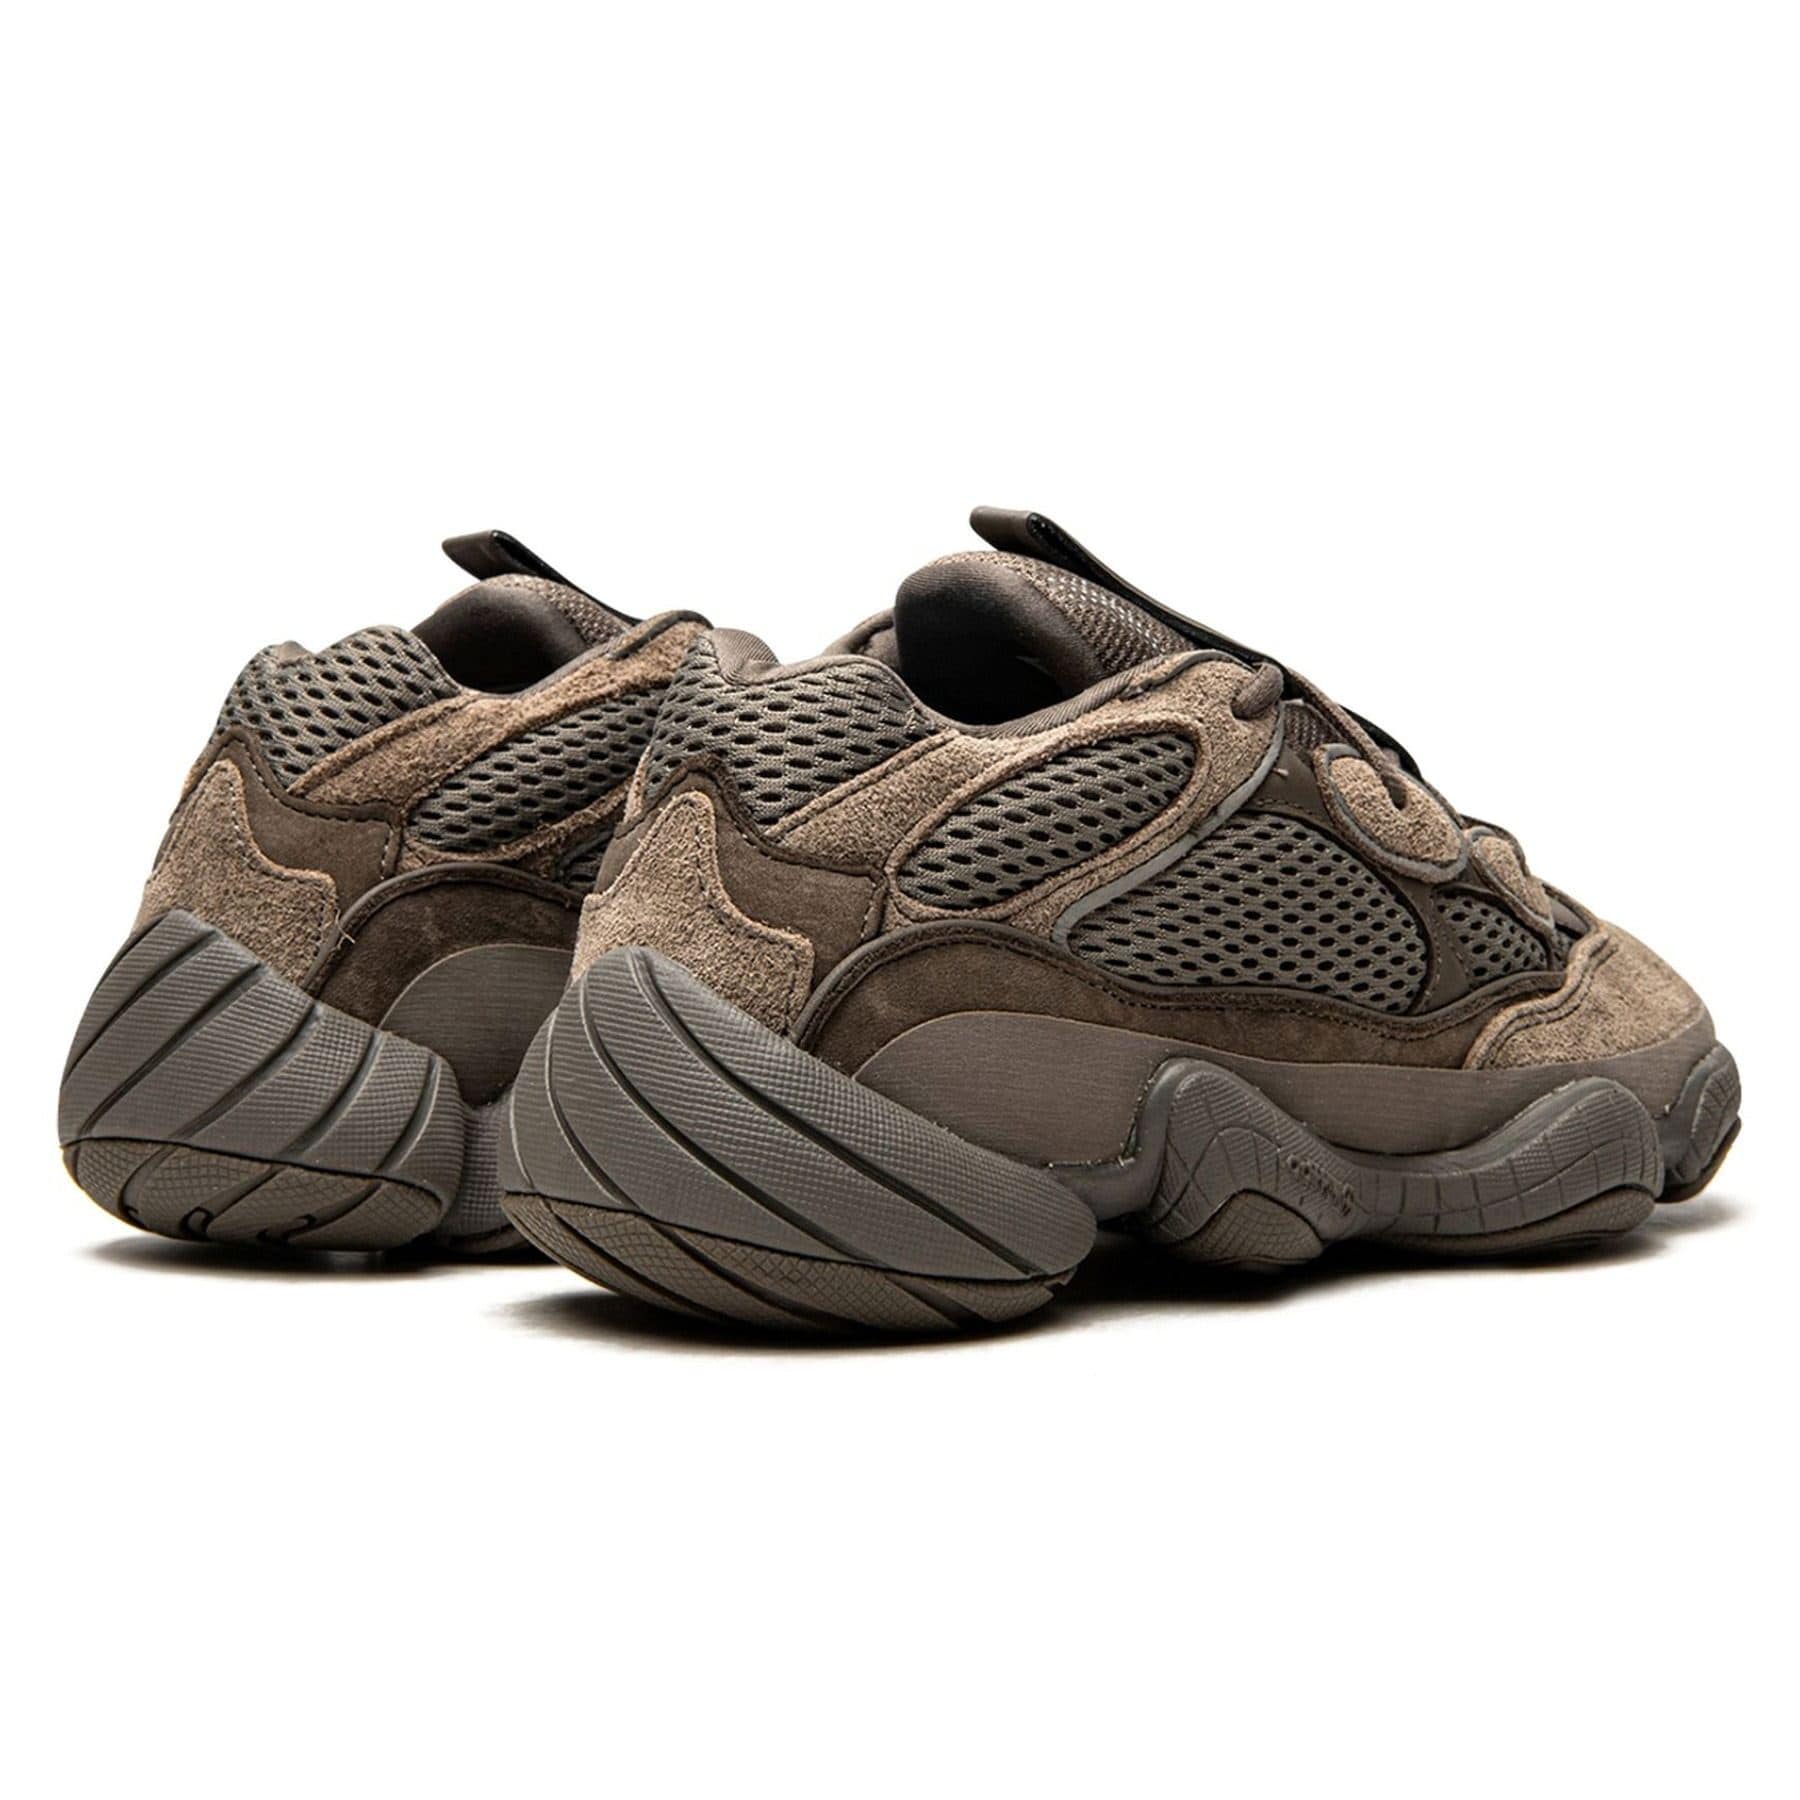 YEEZY 500 CLAY BROWN  26.5